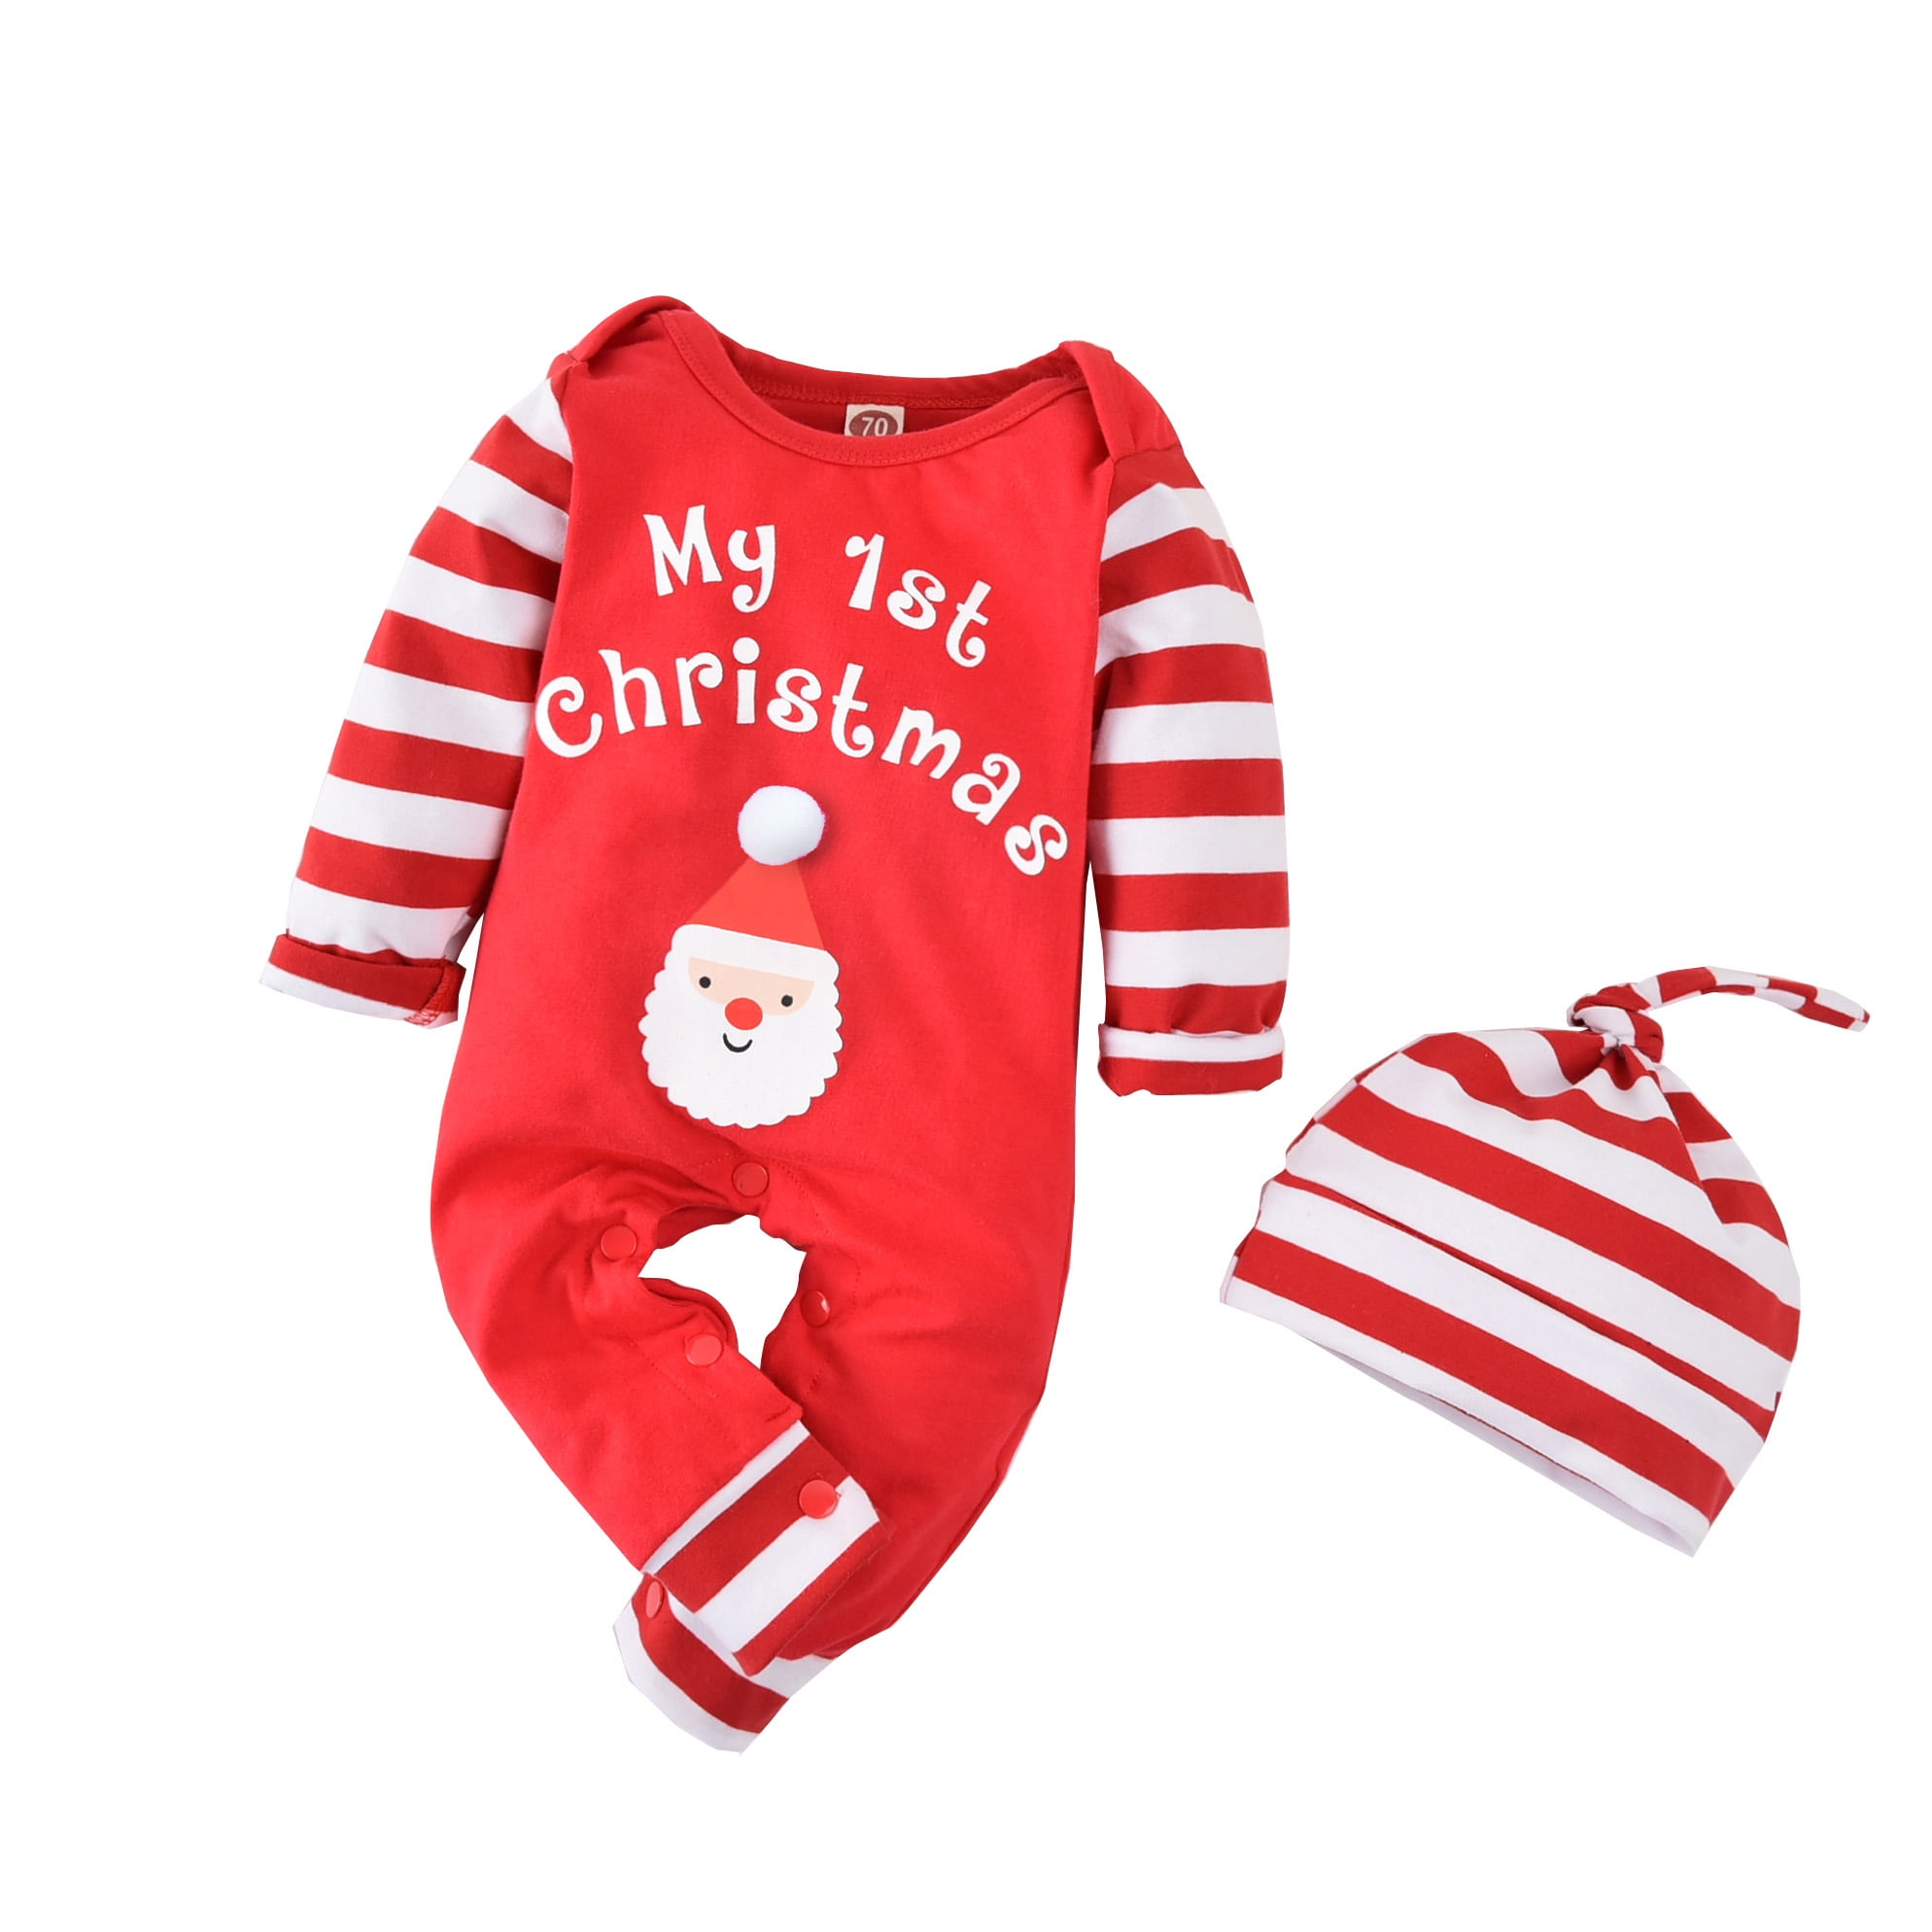 Baby Boy JUST ONE YOU By CARTERS Santa Romper One Piece W/ Hat Size NB Newborn 